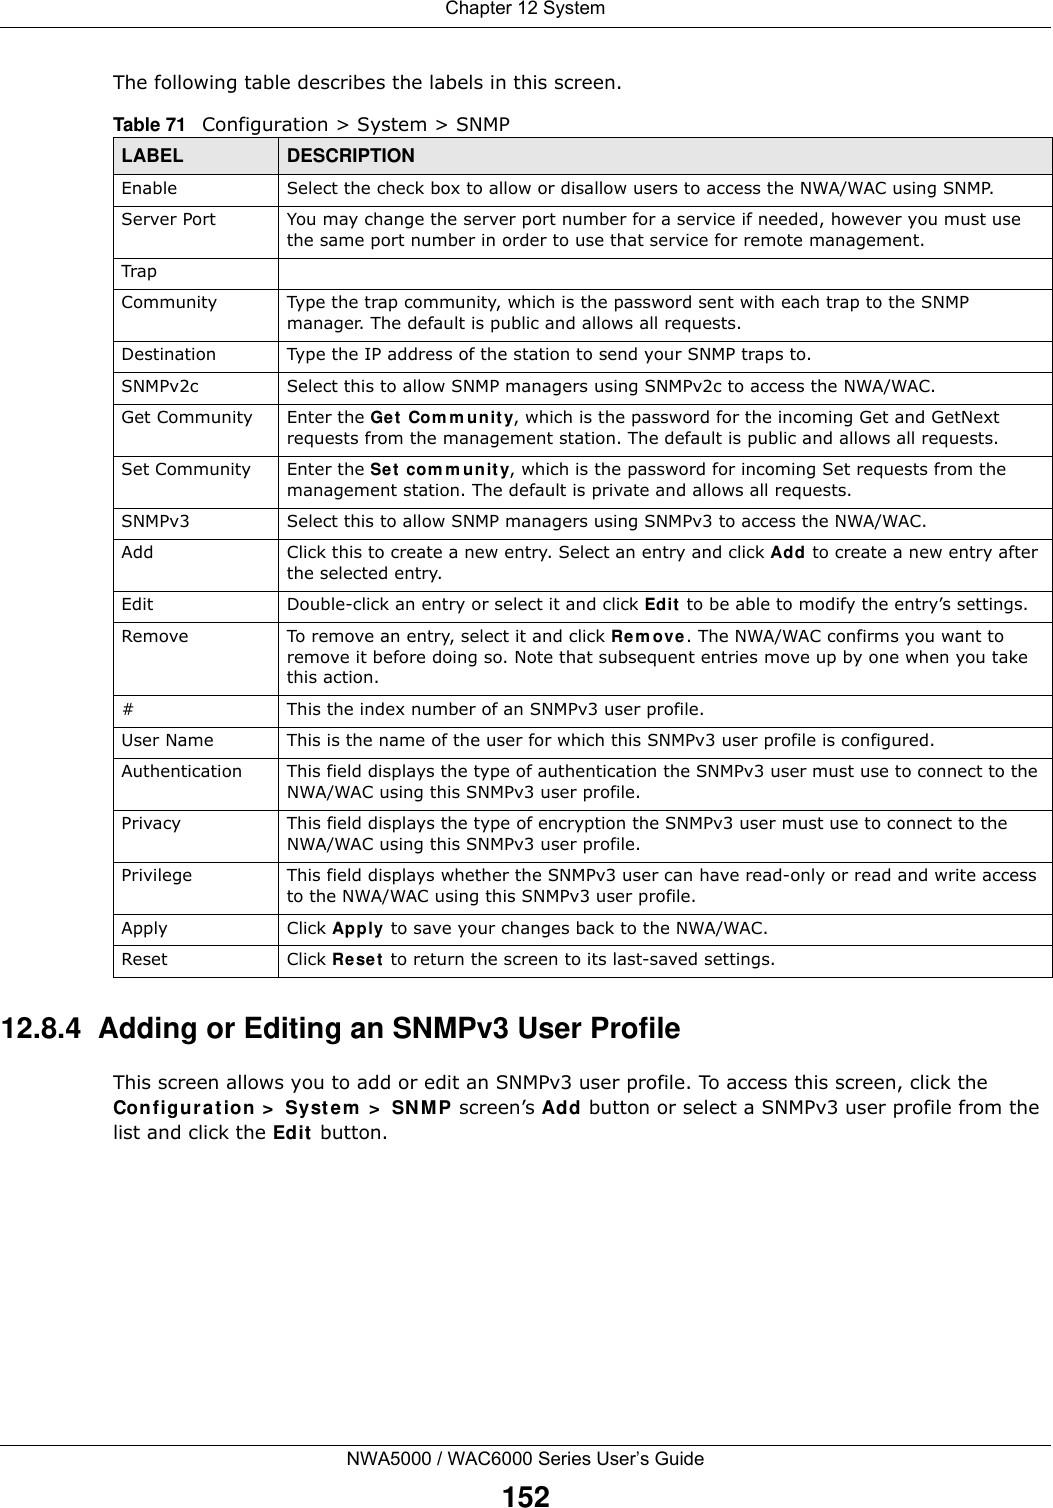 Chapter 12 SystemNWA5000 / WAC6000 Series User’s Guide152The following table describes the labels in this screen.  12.8.4  Adding or Editing an SNMPv3 User ProfileThis screen allows you to add or edit an SNMPv3 user profile. To access this screen, click the Configur at ion &gt;  Syst em  &gt;  SN M P screen’s Add button or select a SNMPv3 user profile from the list and click the Ed it  button.Table 71   Configuration &gt; System &gt; SNMPLABEL DESCRIPTIONEnable Select the check box to allow or disallow users to access the NWA/WAC using SNMP.Server Port You may change the server port number for a service if needed, however you must use the same port number in order to use that service for remote management.TrapCommunity Type the trap community, which is the password sent with each trap to the SNMP manager. The default is public and allows all requests.Destination Type the IP address of the station to send your SNMP traps to.SNMPv2c Select this to allow SNMP managers using SNMPv2c to access the NWA/WAC.Get Community Enter the Ge t  Com m unity, which is the password for the incoming Get and GetNext requests from the management station. The default is public and allows all requests.Set Community Enter the Set  com m u n ity, which is the password for incoming Set requests from the management station. The default is private and allows all requests.SNMPv3 Select this to allow SNMP managers using SNMPv3 to access the NWA/WAC.Add Click this to create a new entry. Select an entry and click Add to create a new entry after the selected entry.Edit Double-click an entry or select it and click Edit  to be able to modify the entry’s settings. Remove To remove an entry, select it and click Re m ove. The NWA/WAC confirms you want to remove it before doing so. Note that subsequent entries move up by one when you take this action.#This the index number of an SNMPv3 user profile.User Name This is the name of the user for which this SNMPv3 user profile is configured.Authentication This field displays the type of authentication the SNMPv3 user must use to connect to the NWA/WAC using this SNMPv3 user profile.Privacy This field displays the type of encryption the SNMPv3 user must use to connect to the NWA/WAC using this SNMPv3 user profile.Privilege This field displays whether the SNMPv3 user can have read-only or read and write access to the NWA/WAC using this SNMPv3 user profile.Apply Click Apply to save your changes back to the NWA/WAC. Reset Click Rese t  to return the screen to its last-saved settings. 